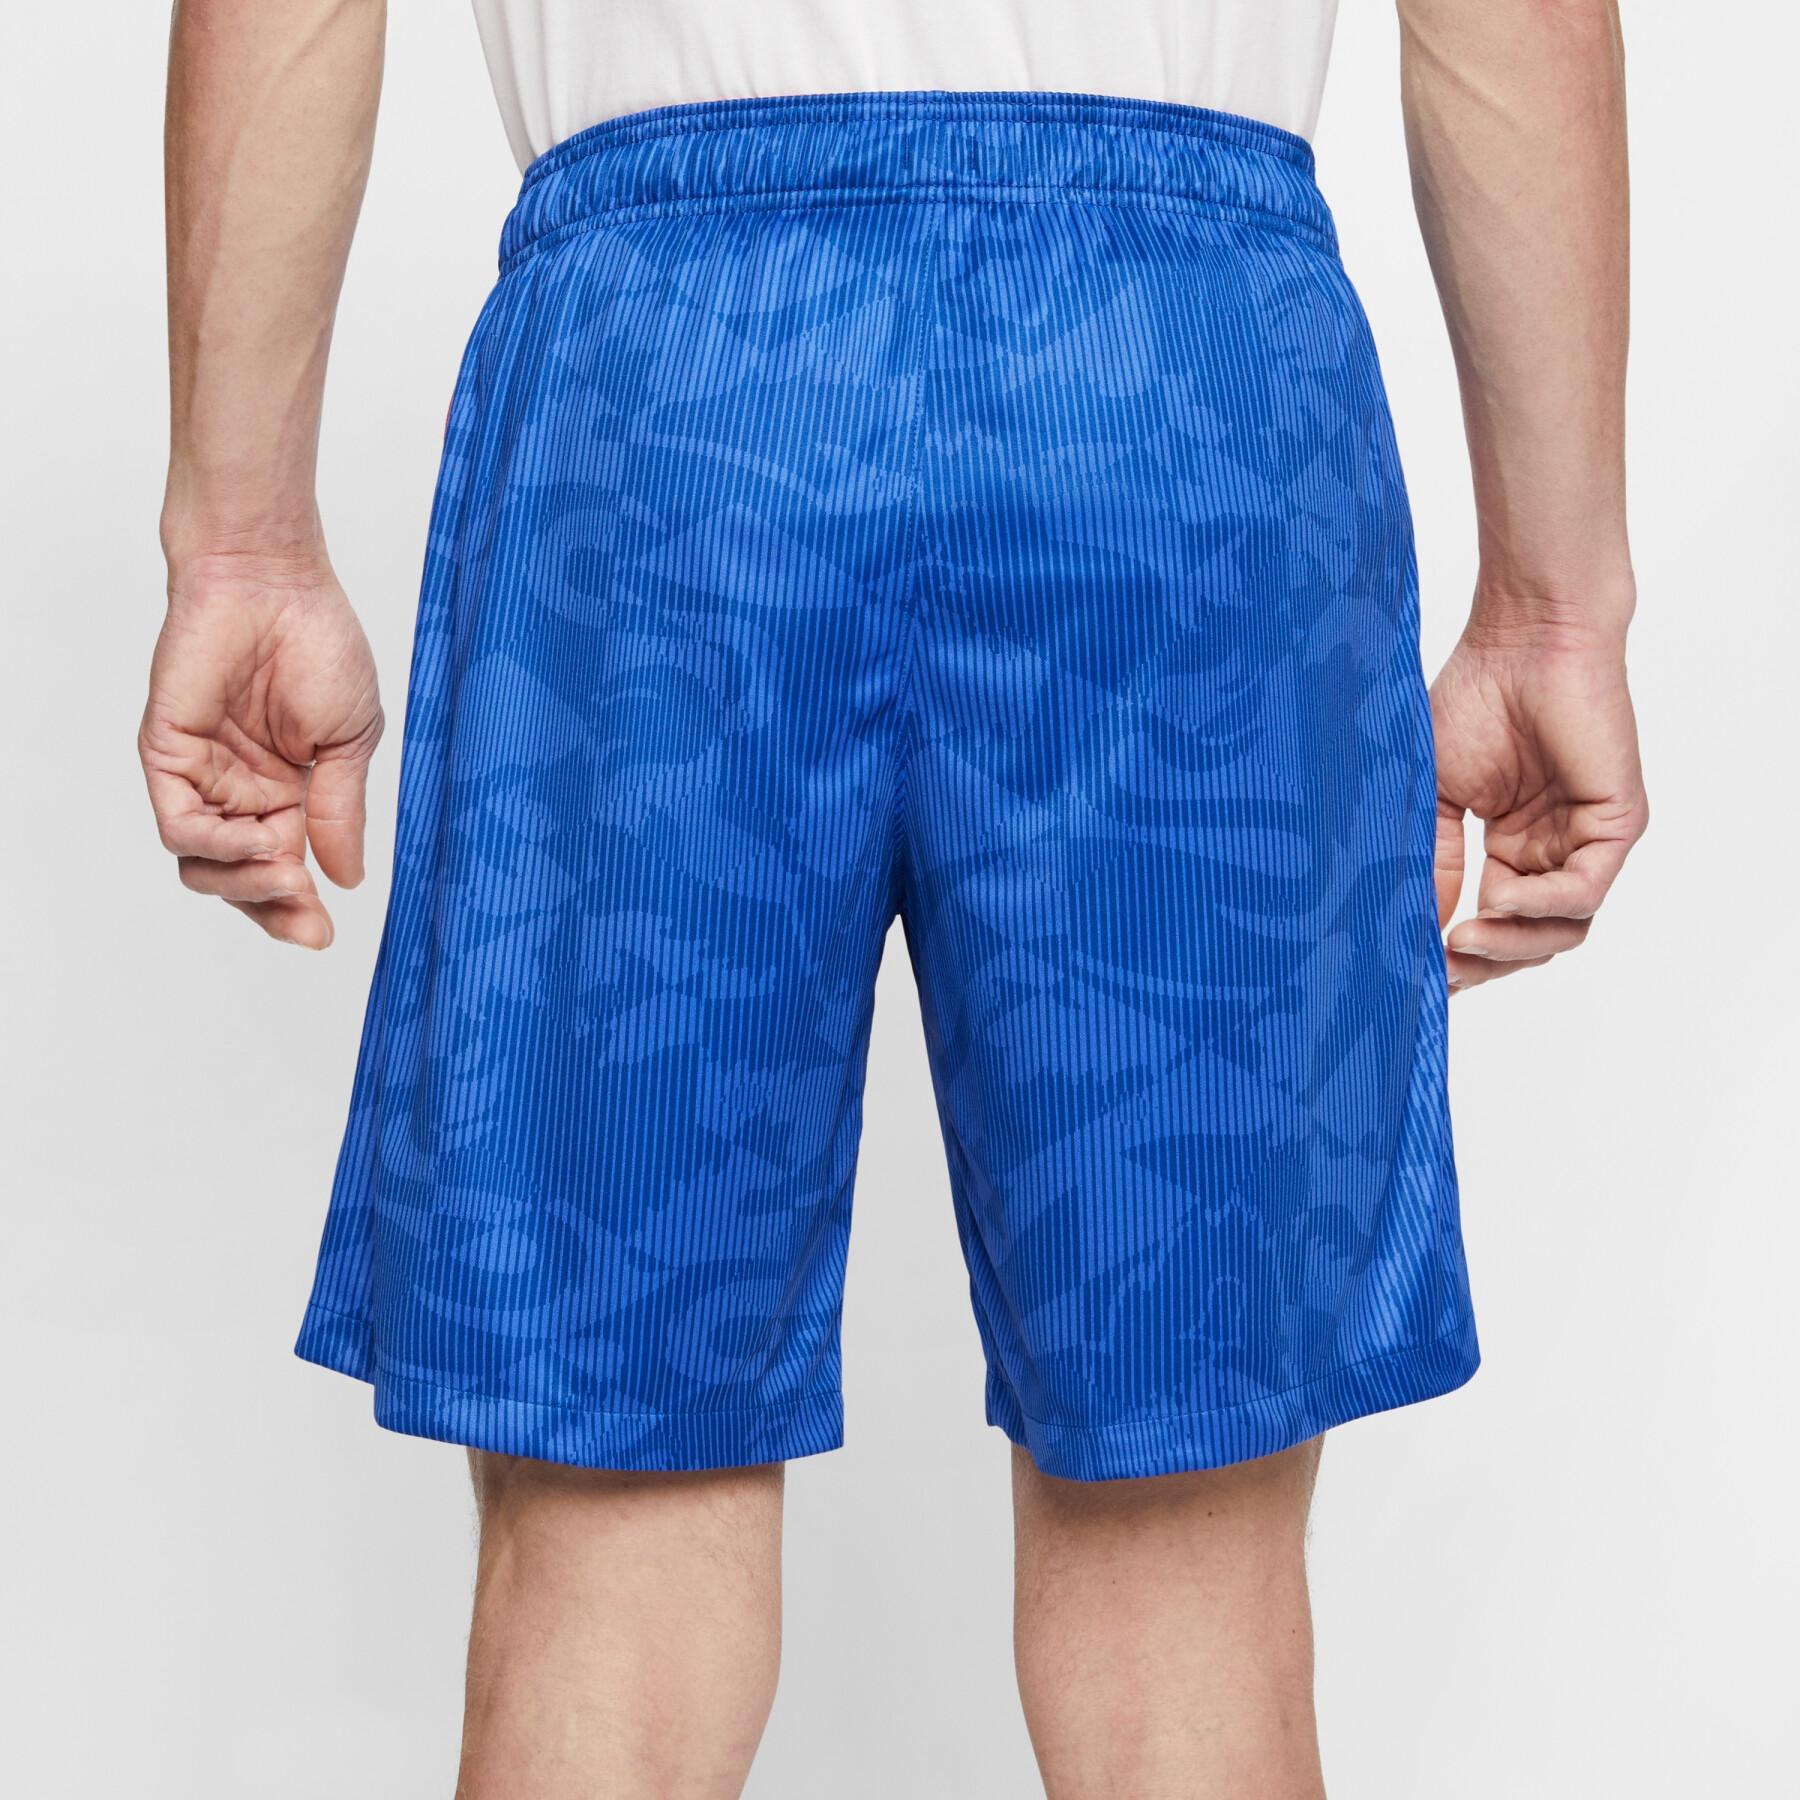 Outdoor shorts Angleterre 2020